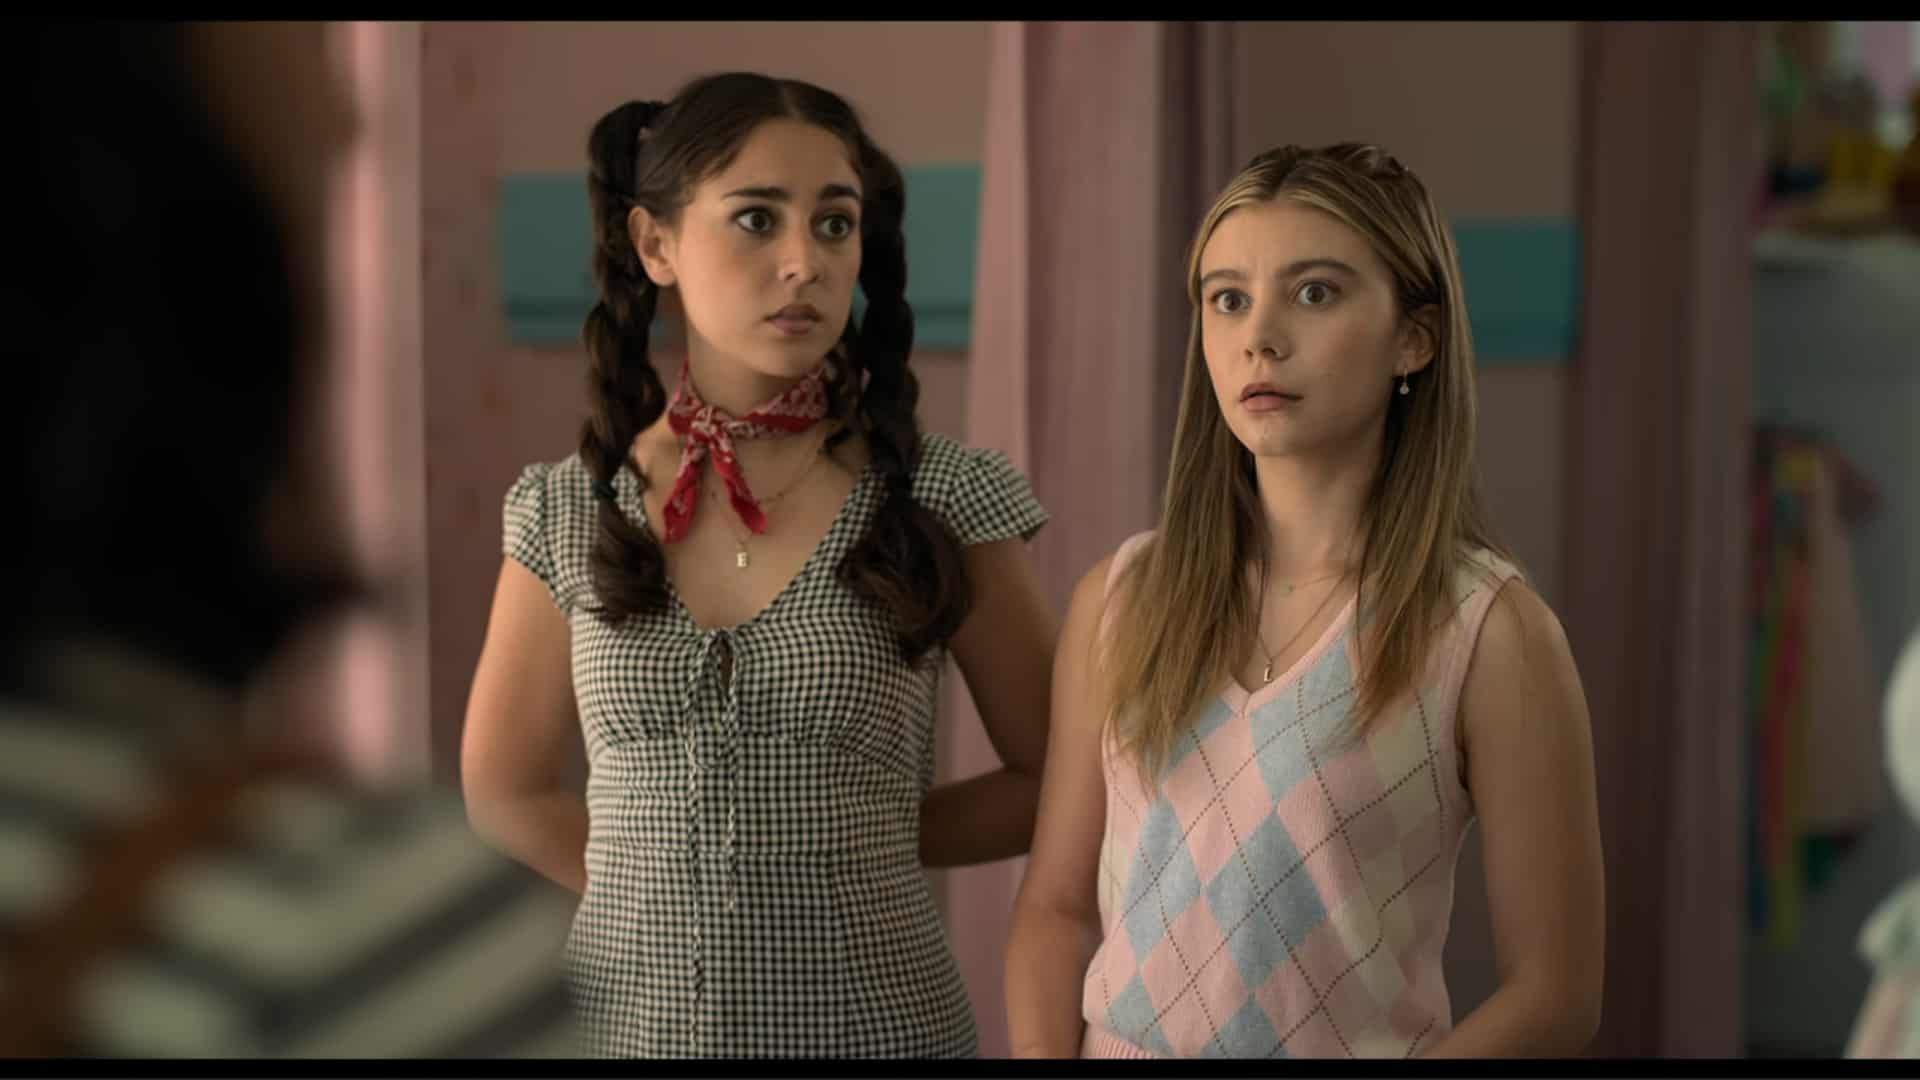 Esther (Samia Finnerty) and Leah (Genevieve Hannelius) realizing Auden made out with Maggie's ex